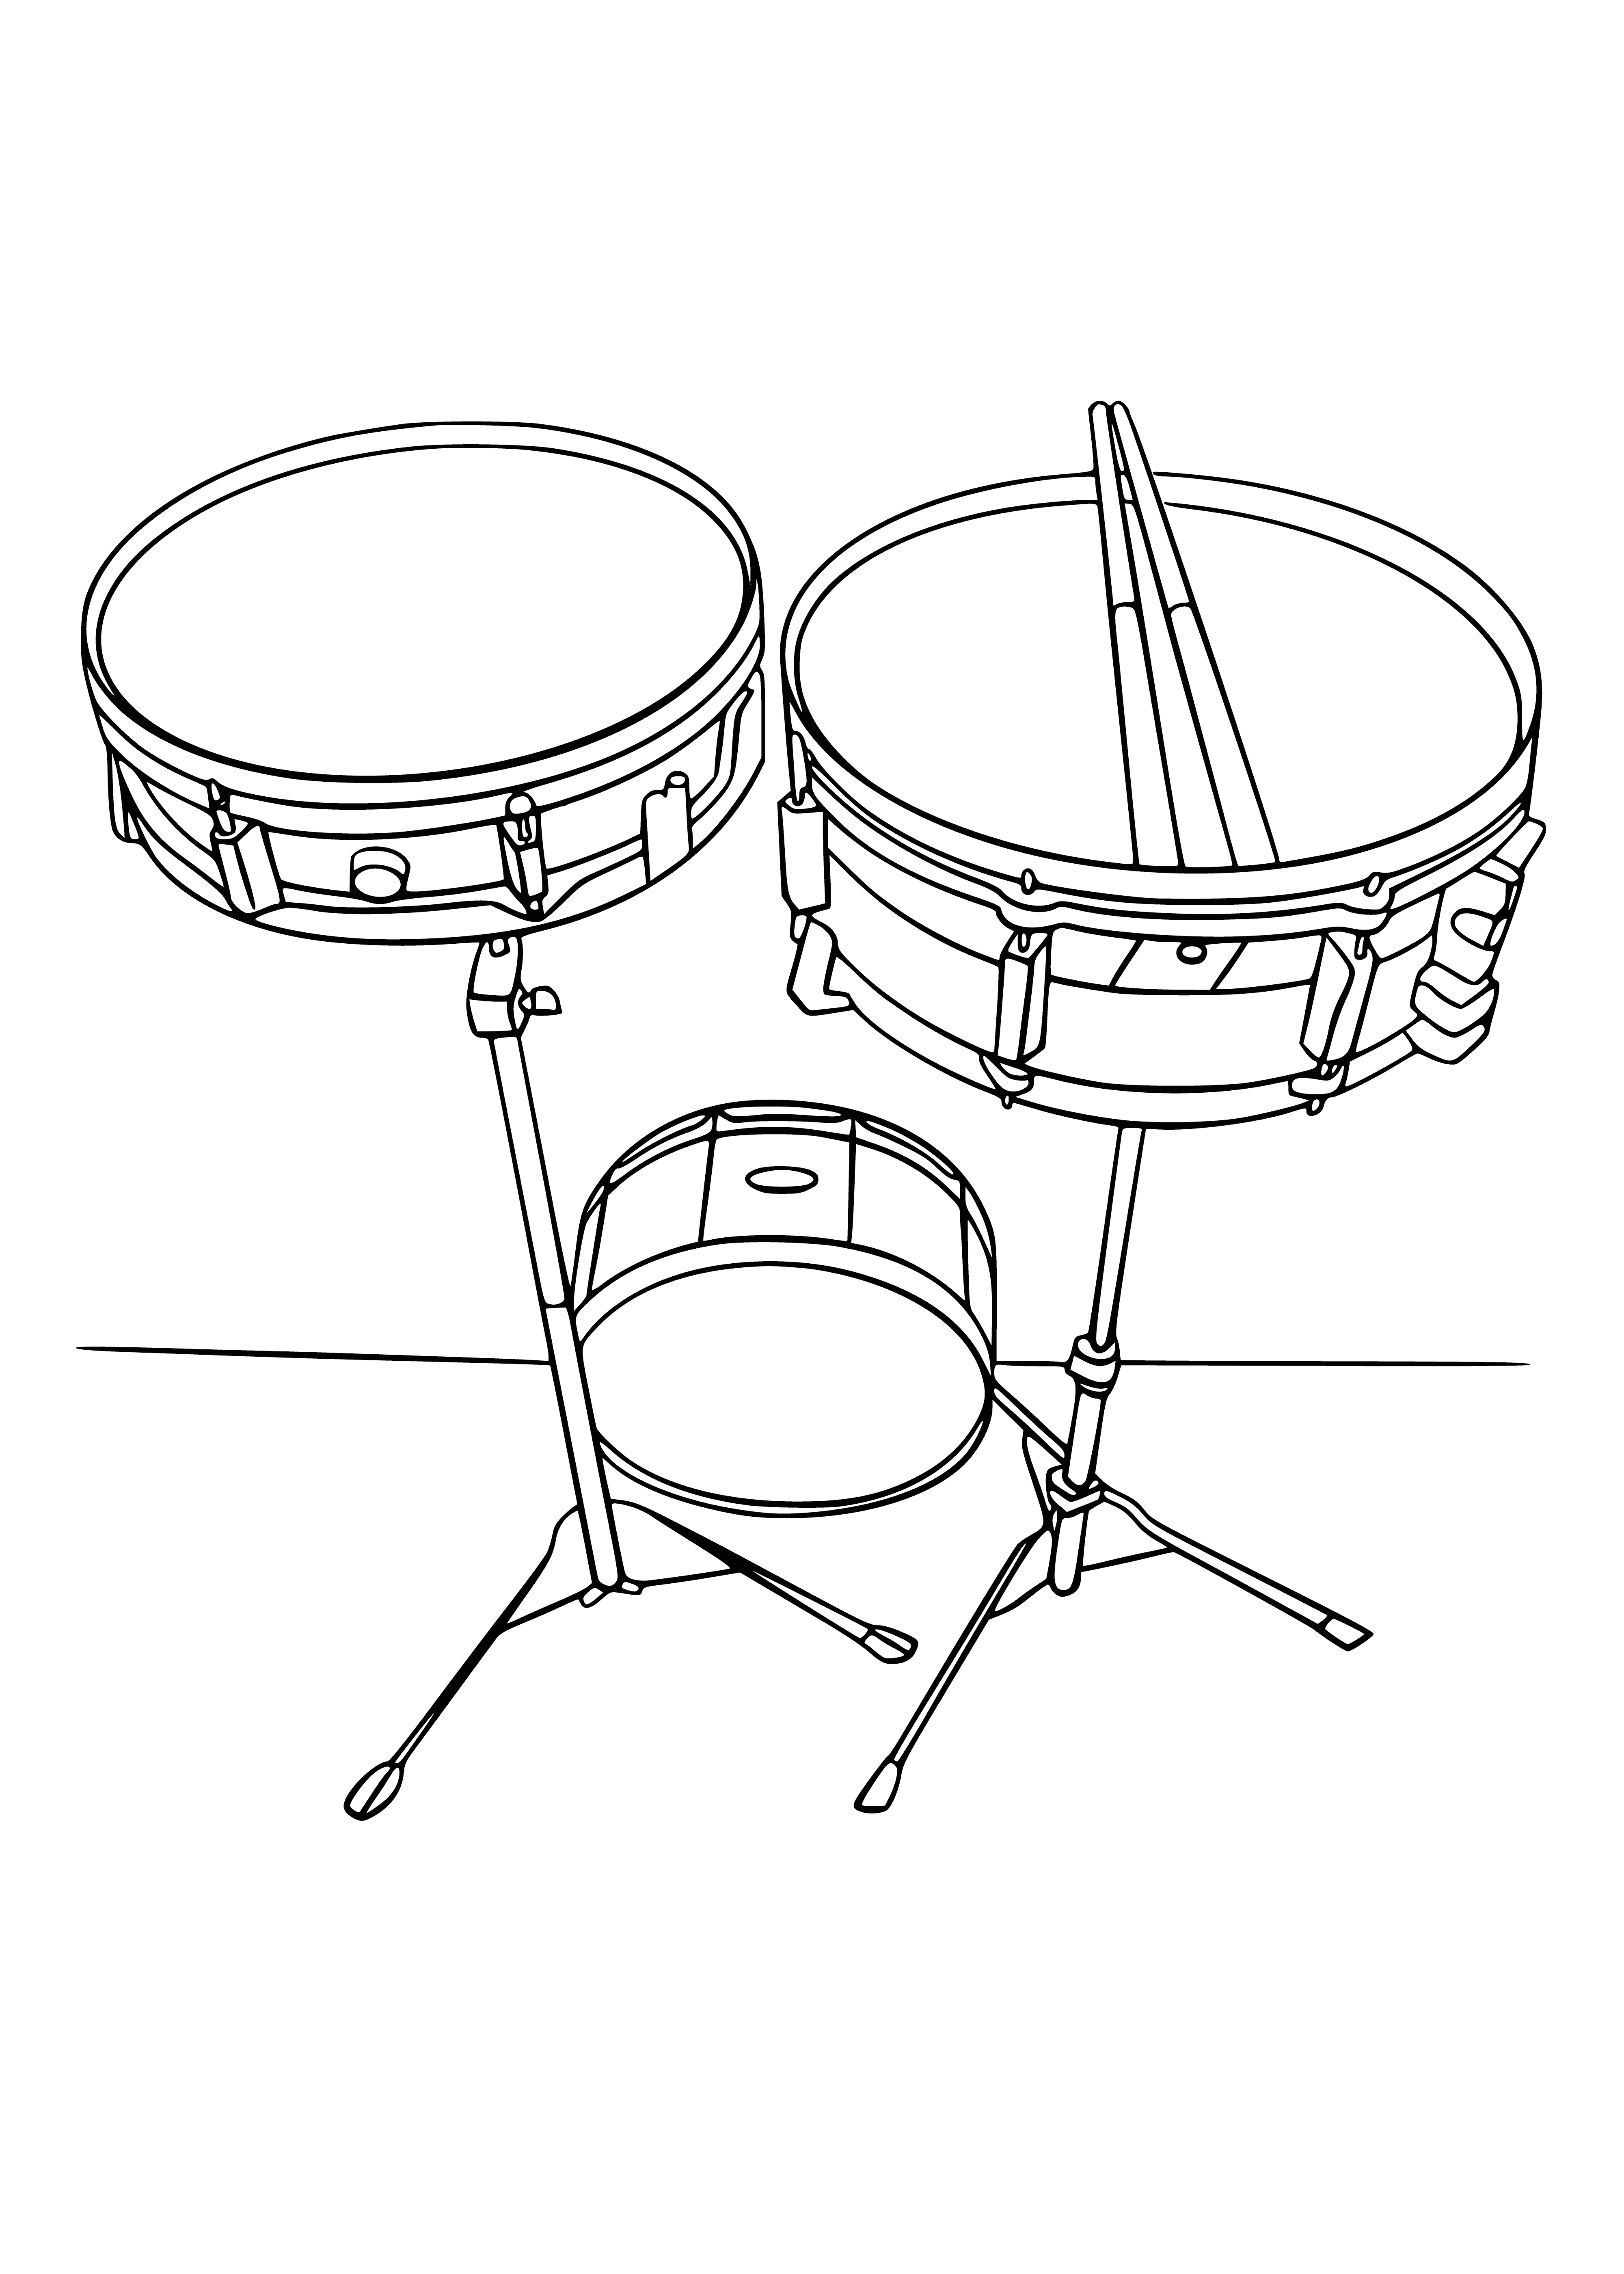 coloring page: Drums are a part of the percussion family, played by hand or sticks. Drum sets feature bass drums & cymbals, and are played by foot and hands. #Music